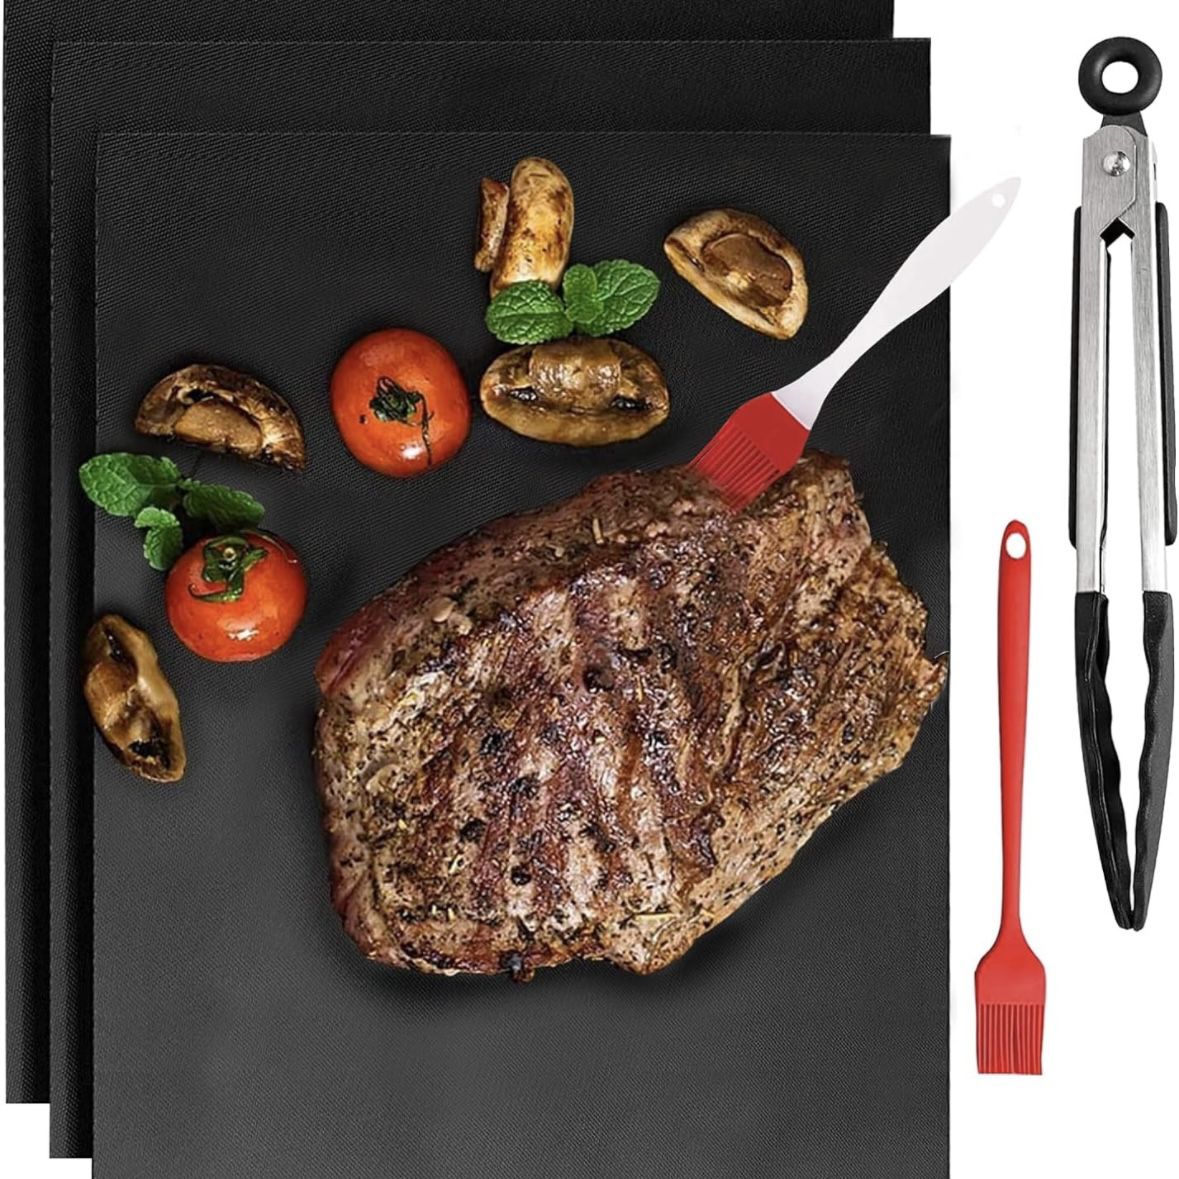 Barbecue BBQ Grill Mat Set : 3 Thick Grill Mats, 2 Silicone Brush, 1 Tong NEW Accessories 